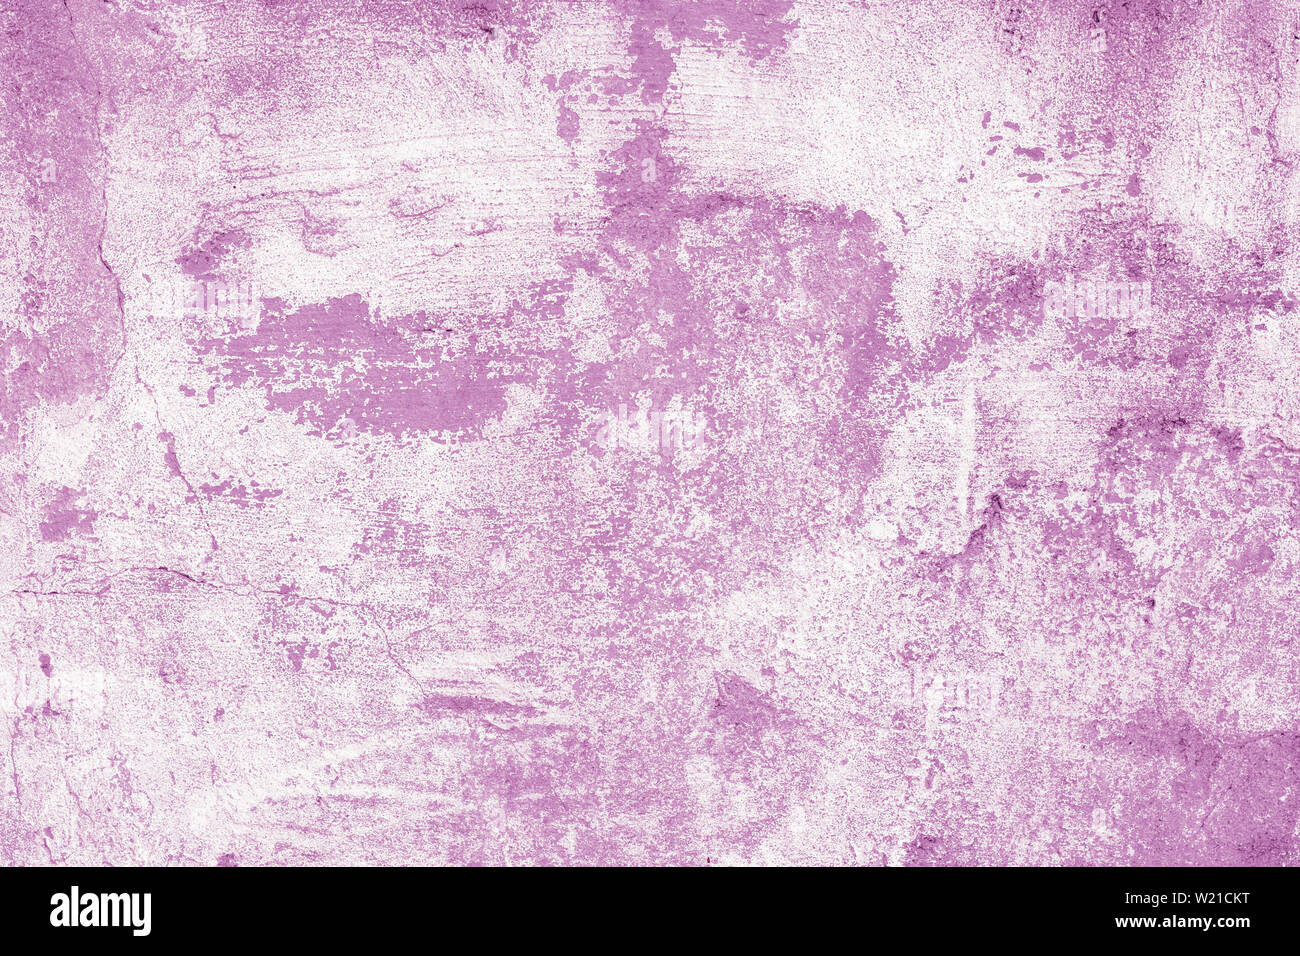 https://c8.alamy.com/comp/W21CKT/abstract-pattern-pink-background-purple-paint-stains-on-white-canvas-creative-illustration-of-aquarelle-artwork-light-drawing-surface-grunge-wal-W21CKT.jpg